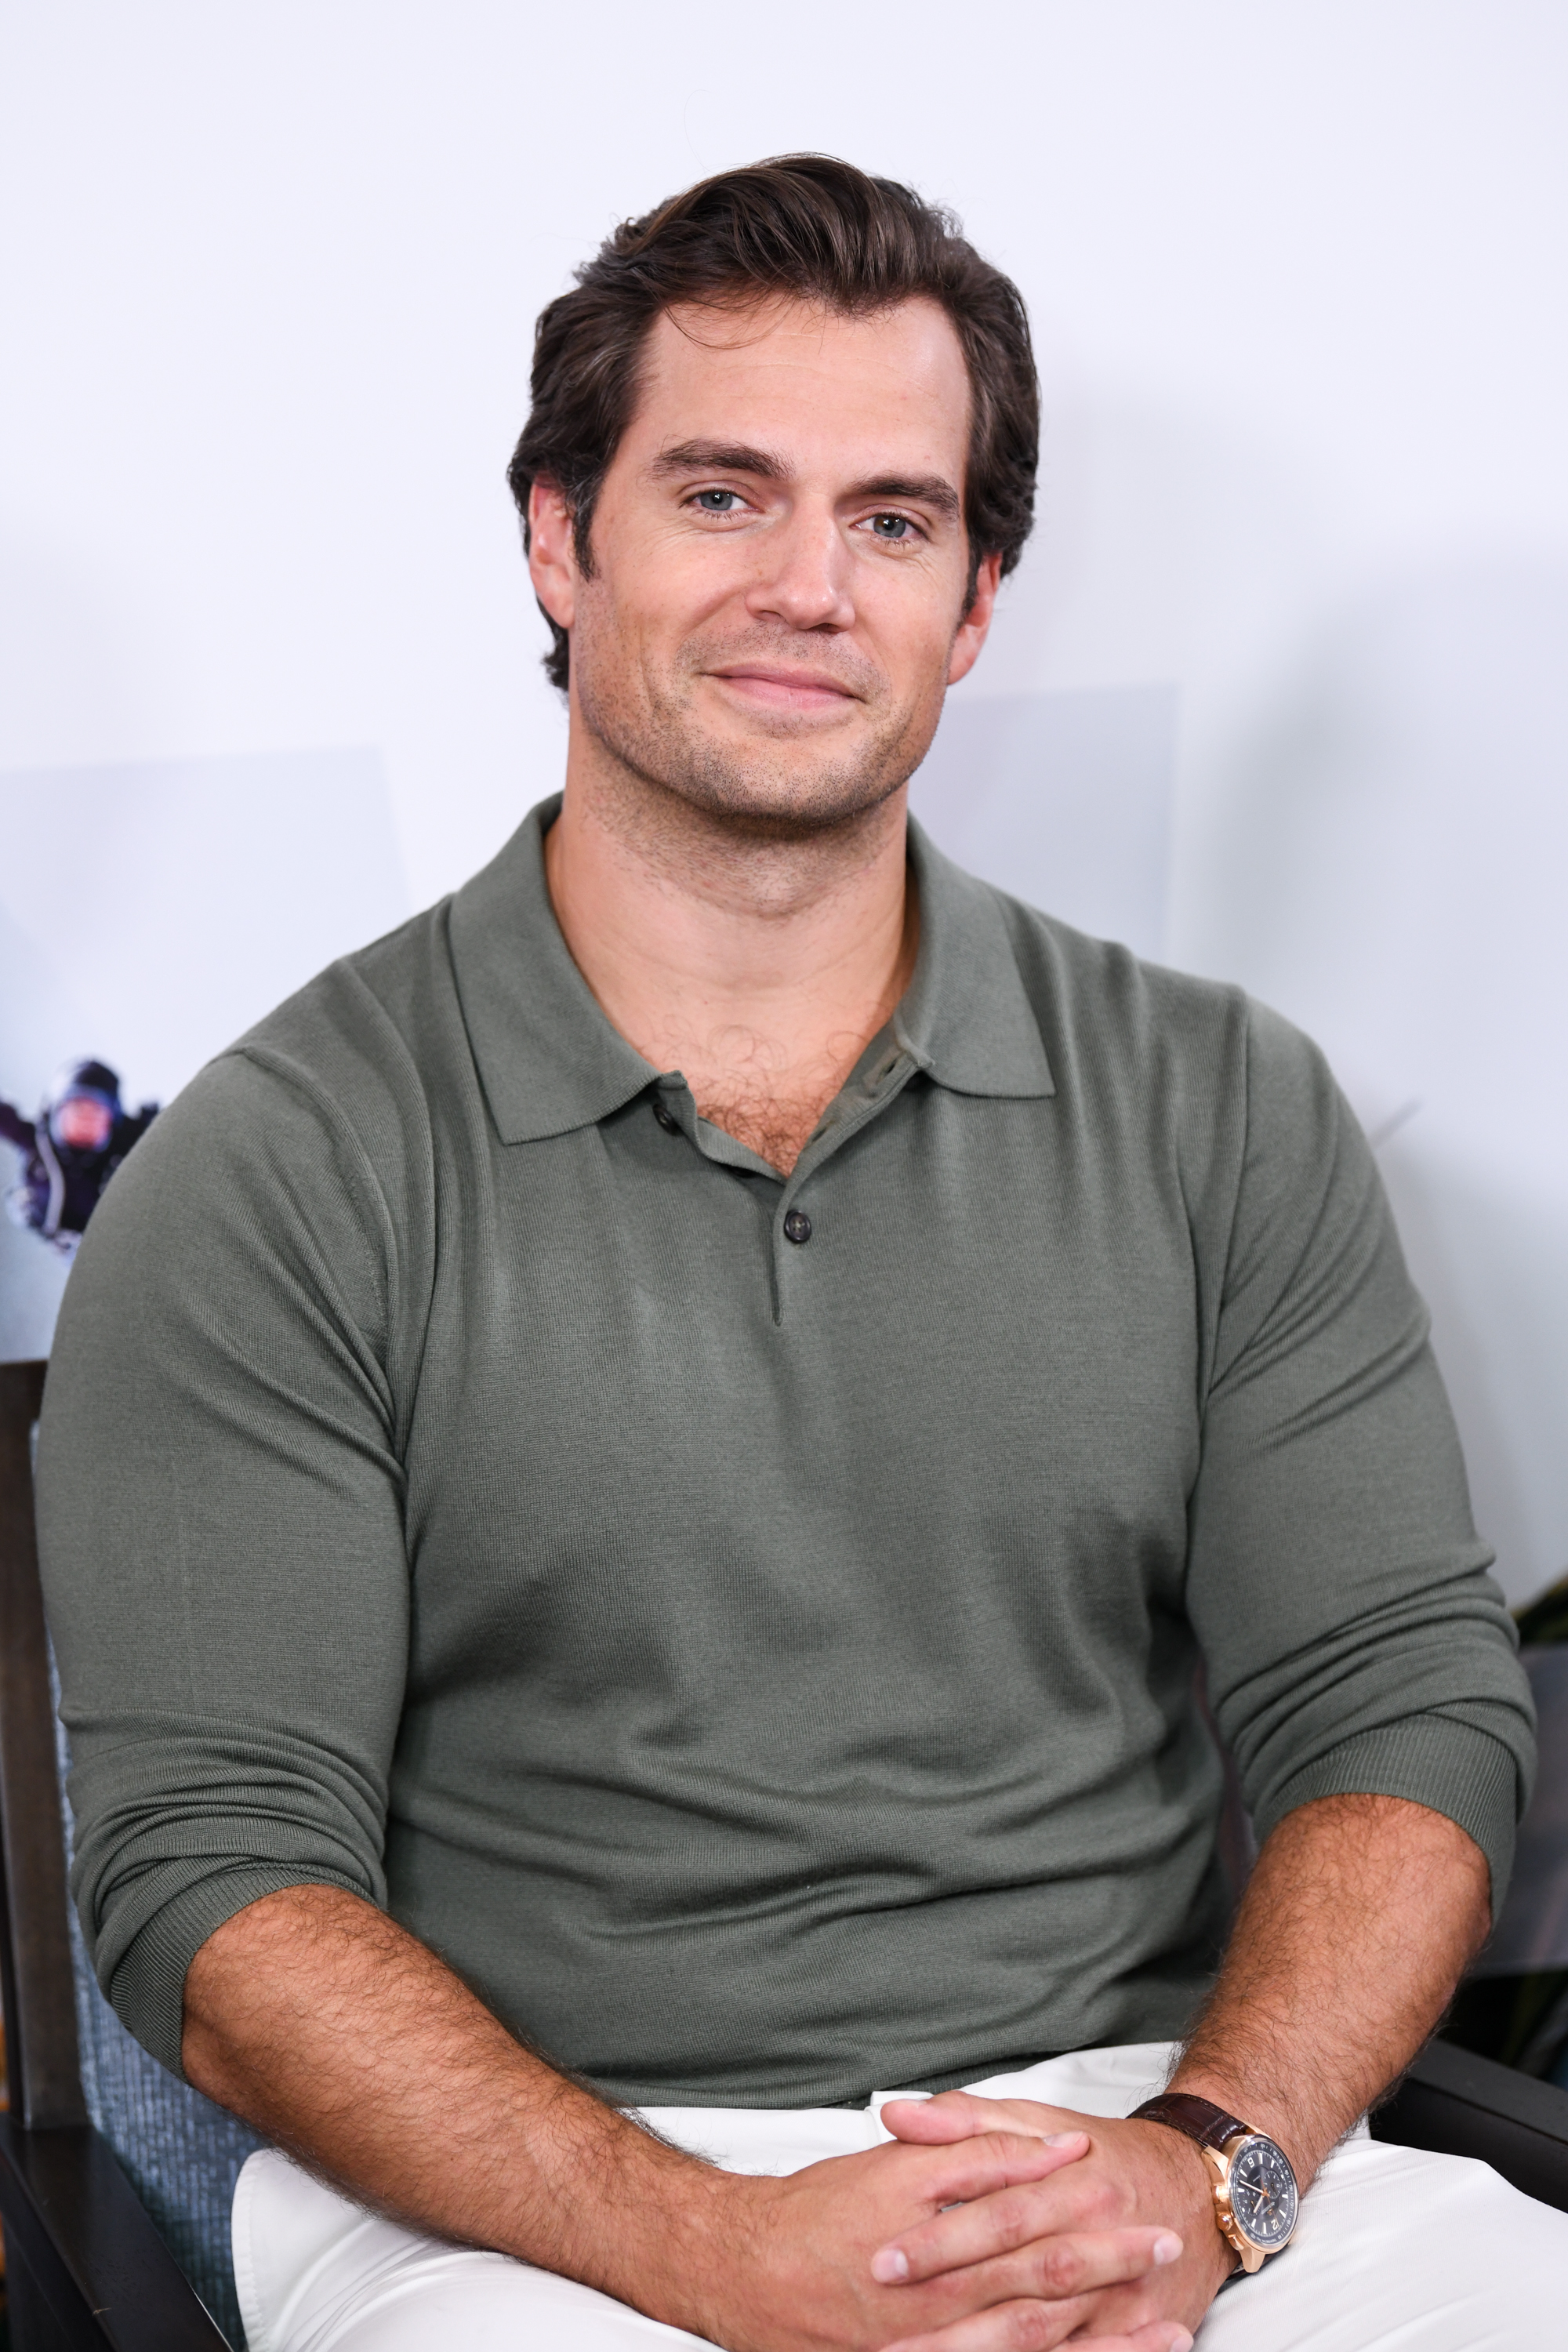 Henry Cavill attends the "Mission: Impossible - Fallout" China Press Junket at The Peninsula Hotel on August 29, 2018 in Beijing, China. | Source: Getty Images